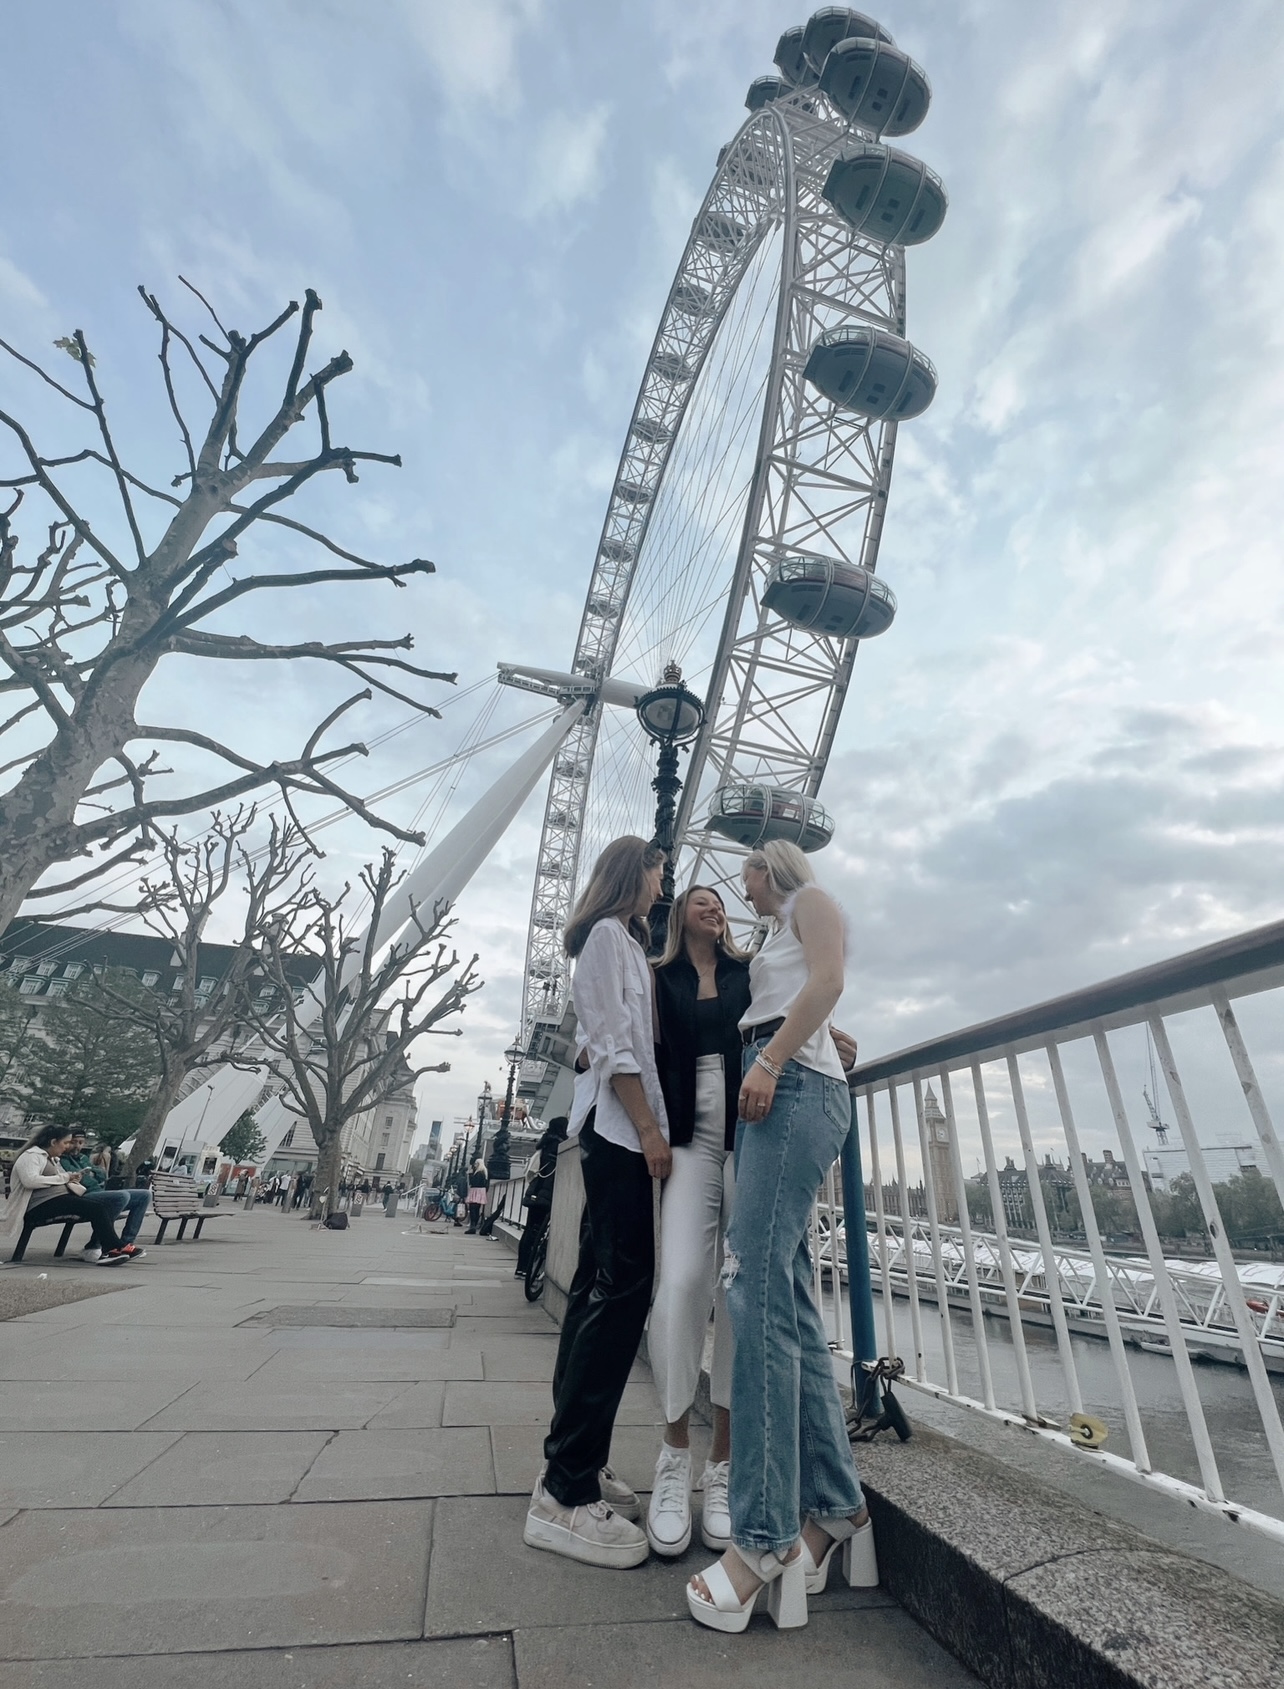 Isabella and two other women standing in front of London Eye.